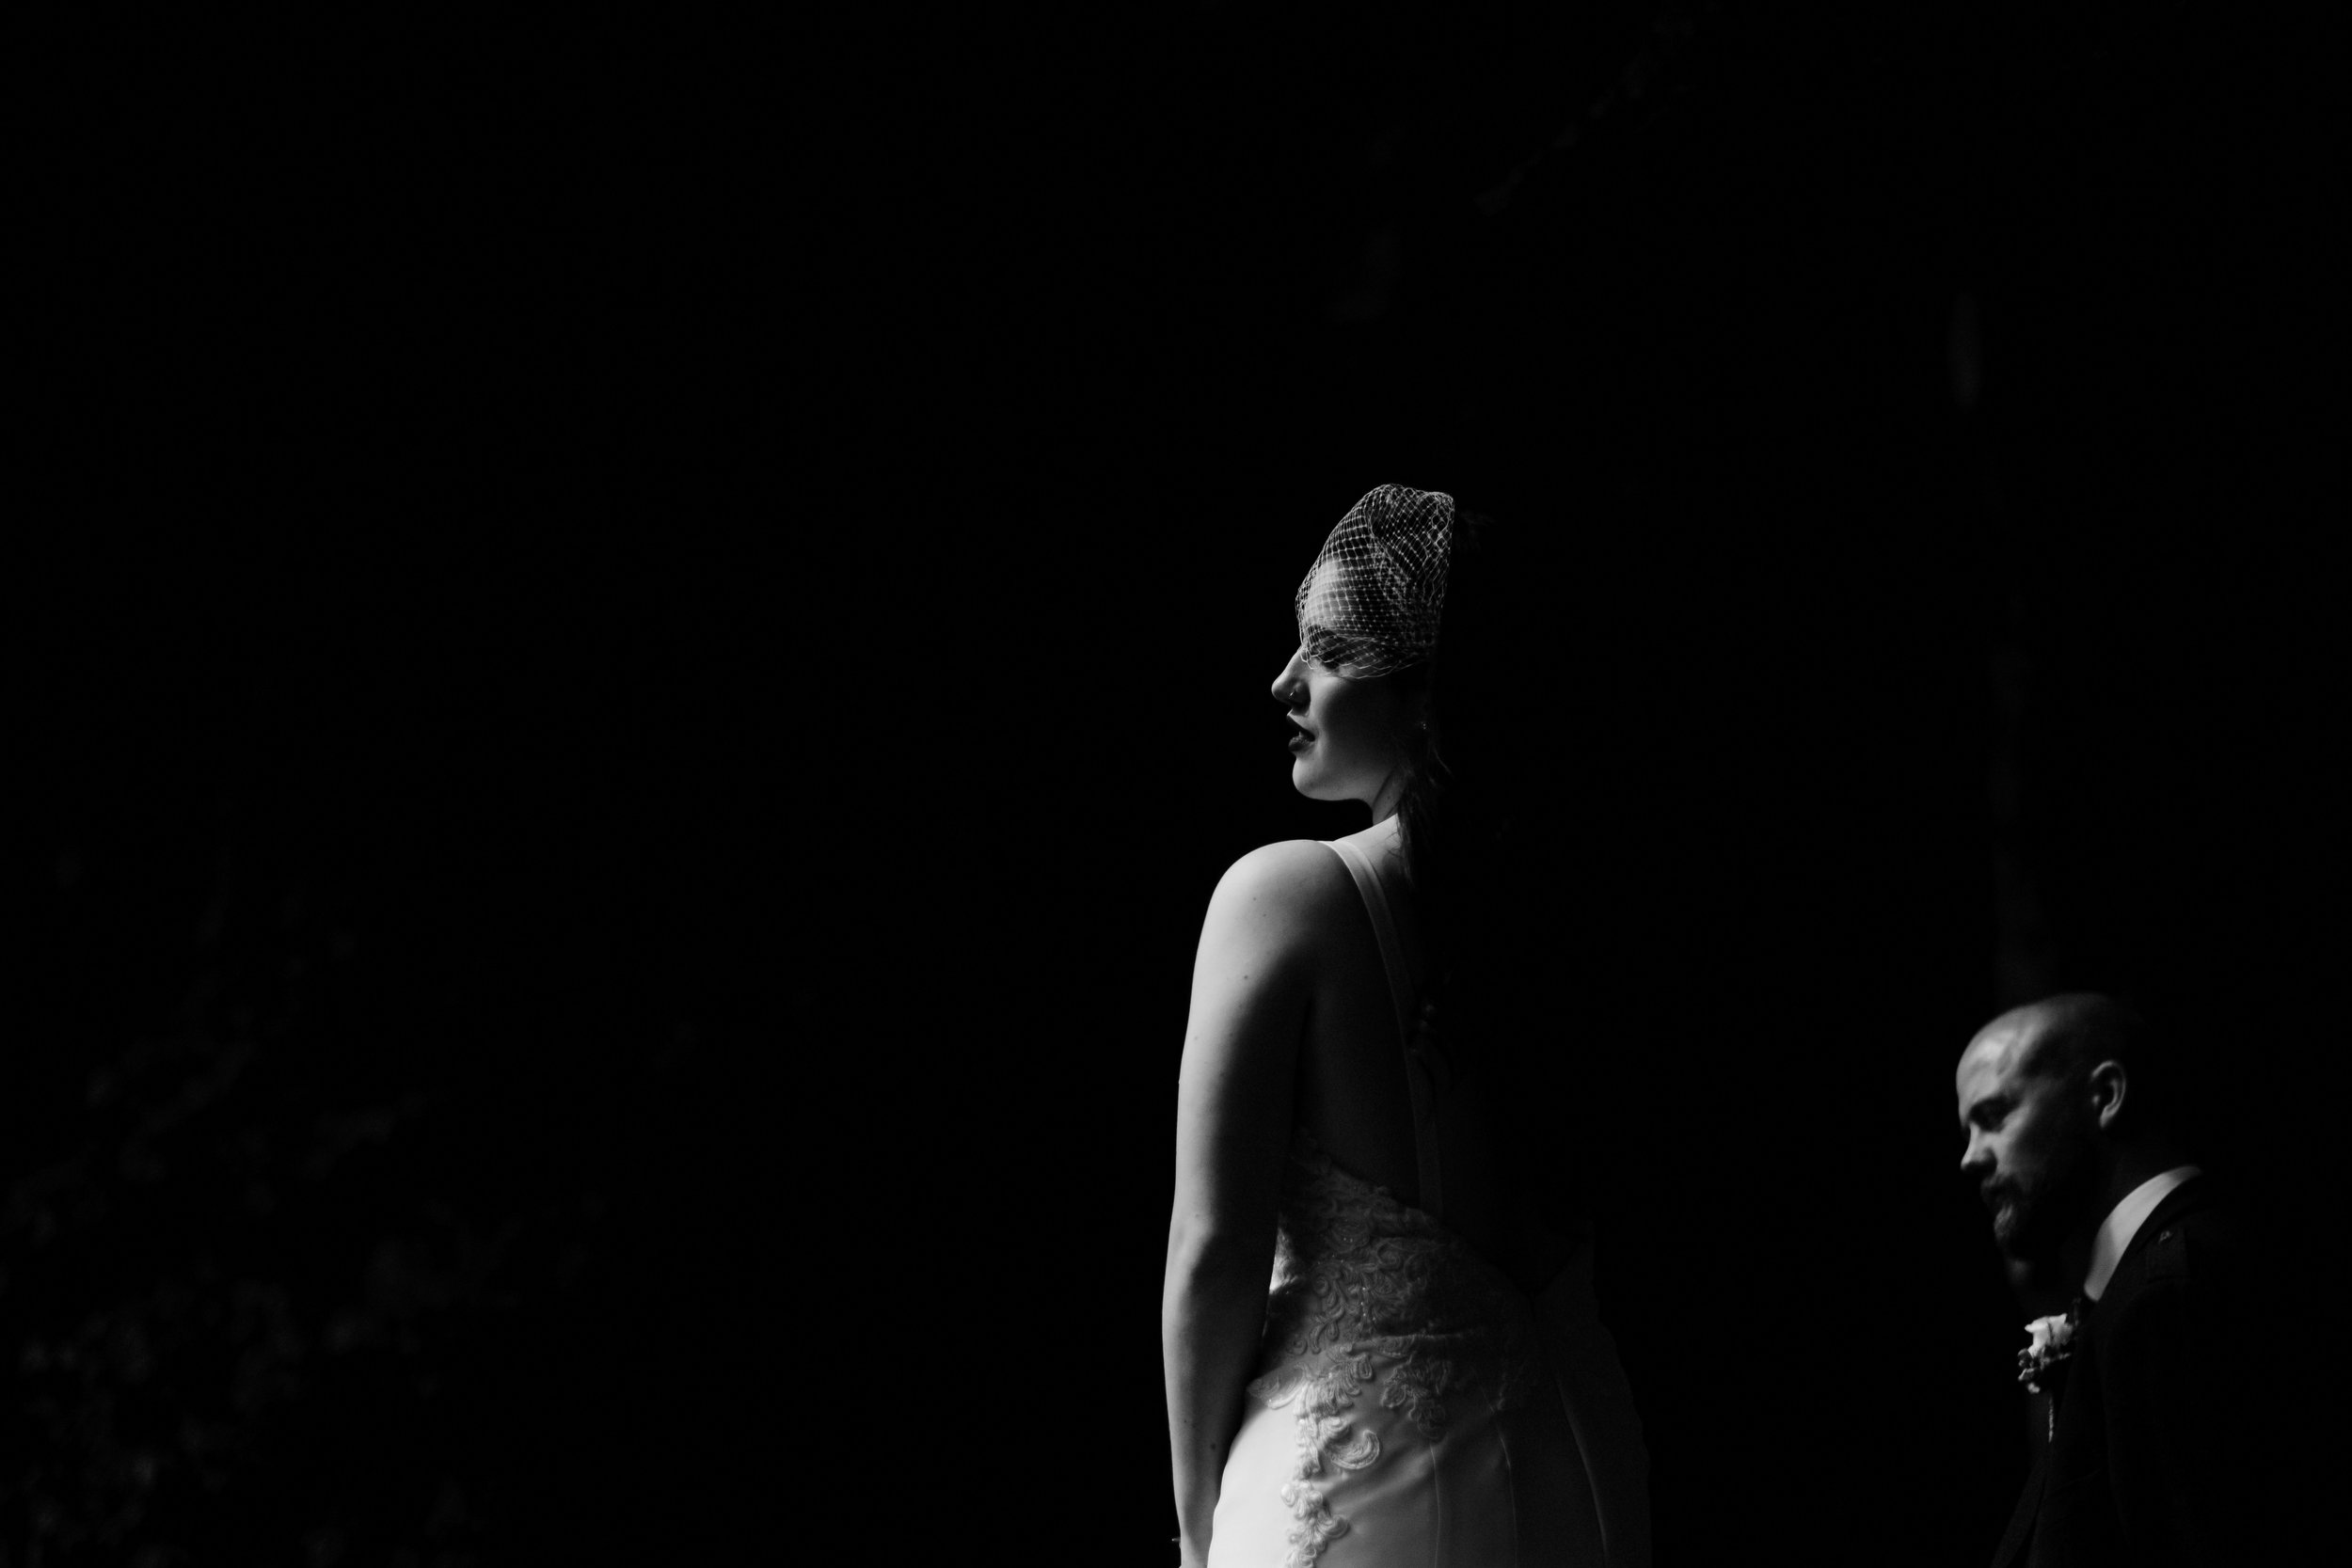 Bride and groom silhouettes